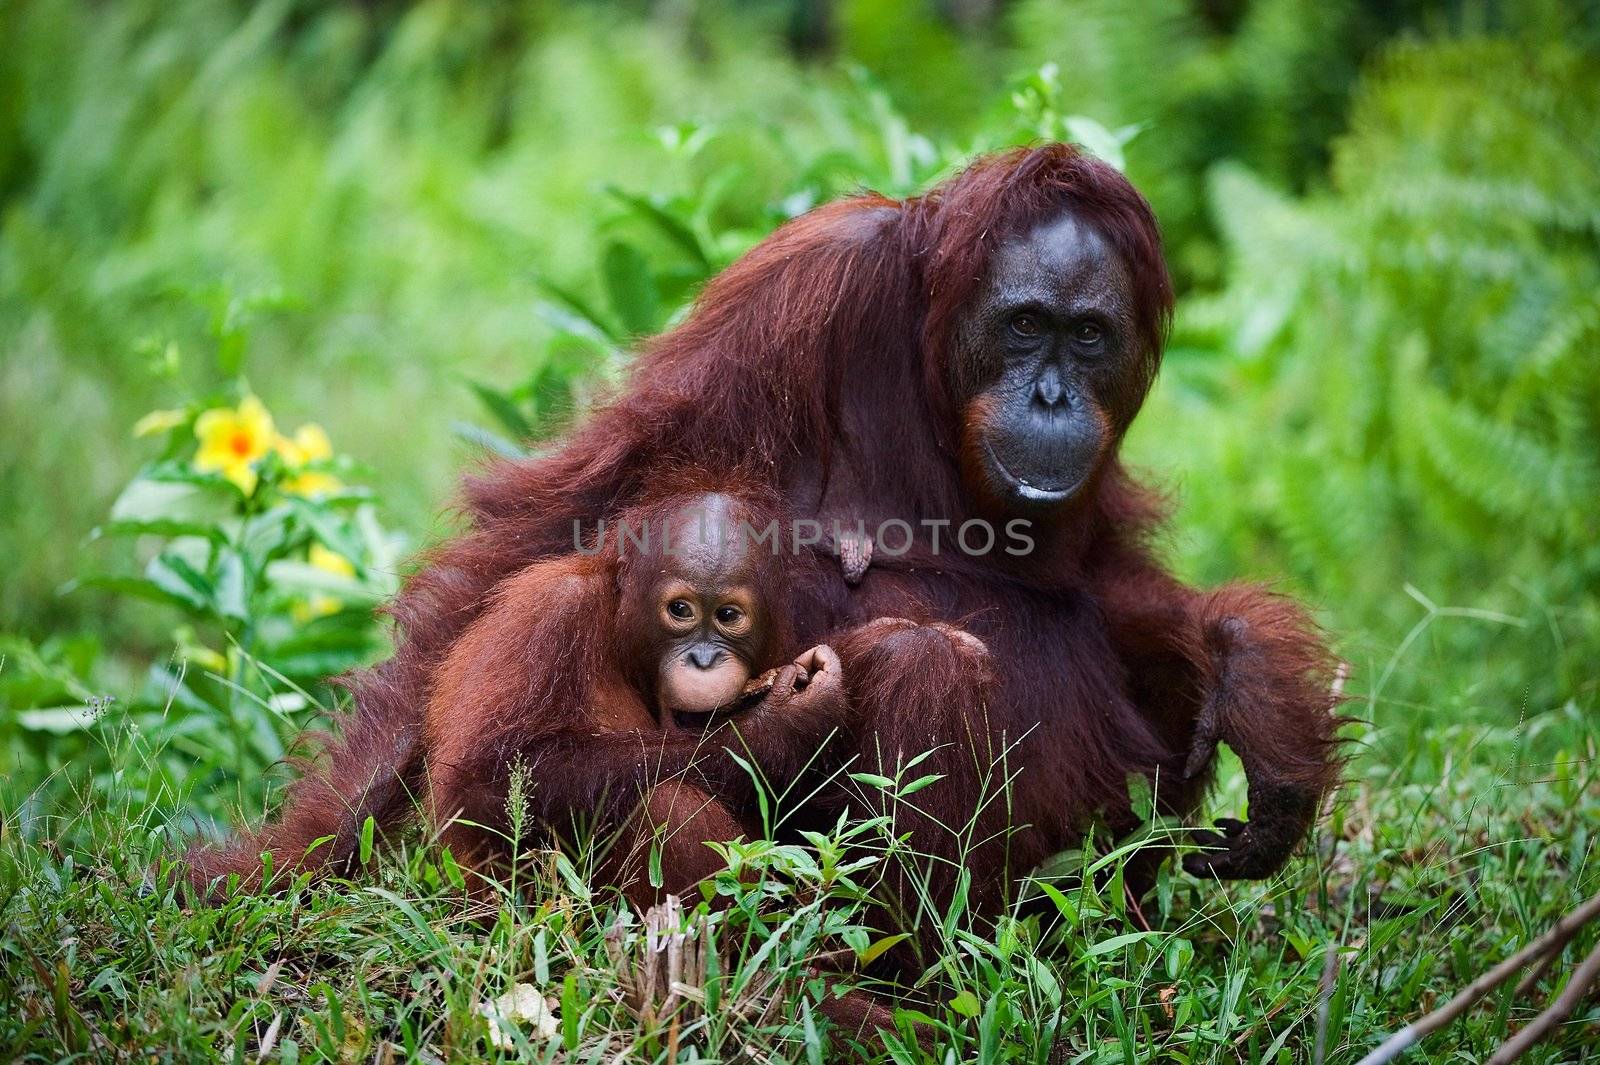 Female the orangutan with the kid on a grass. by SURZ